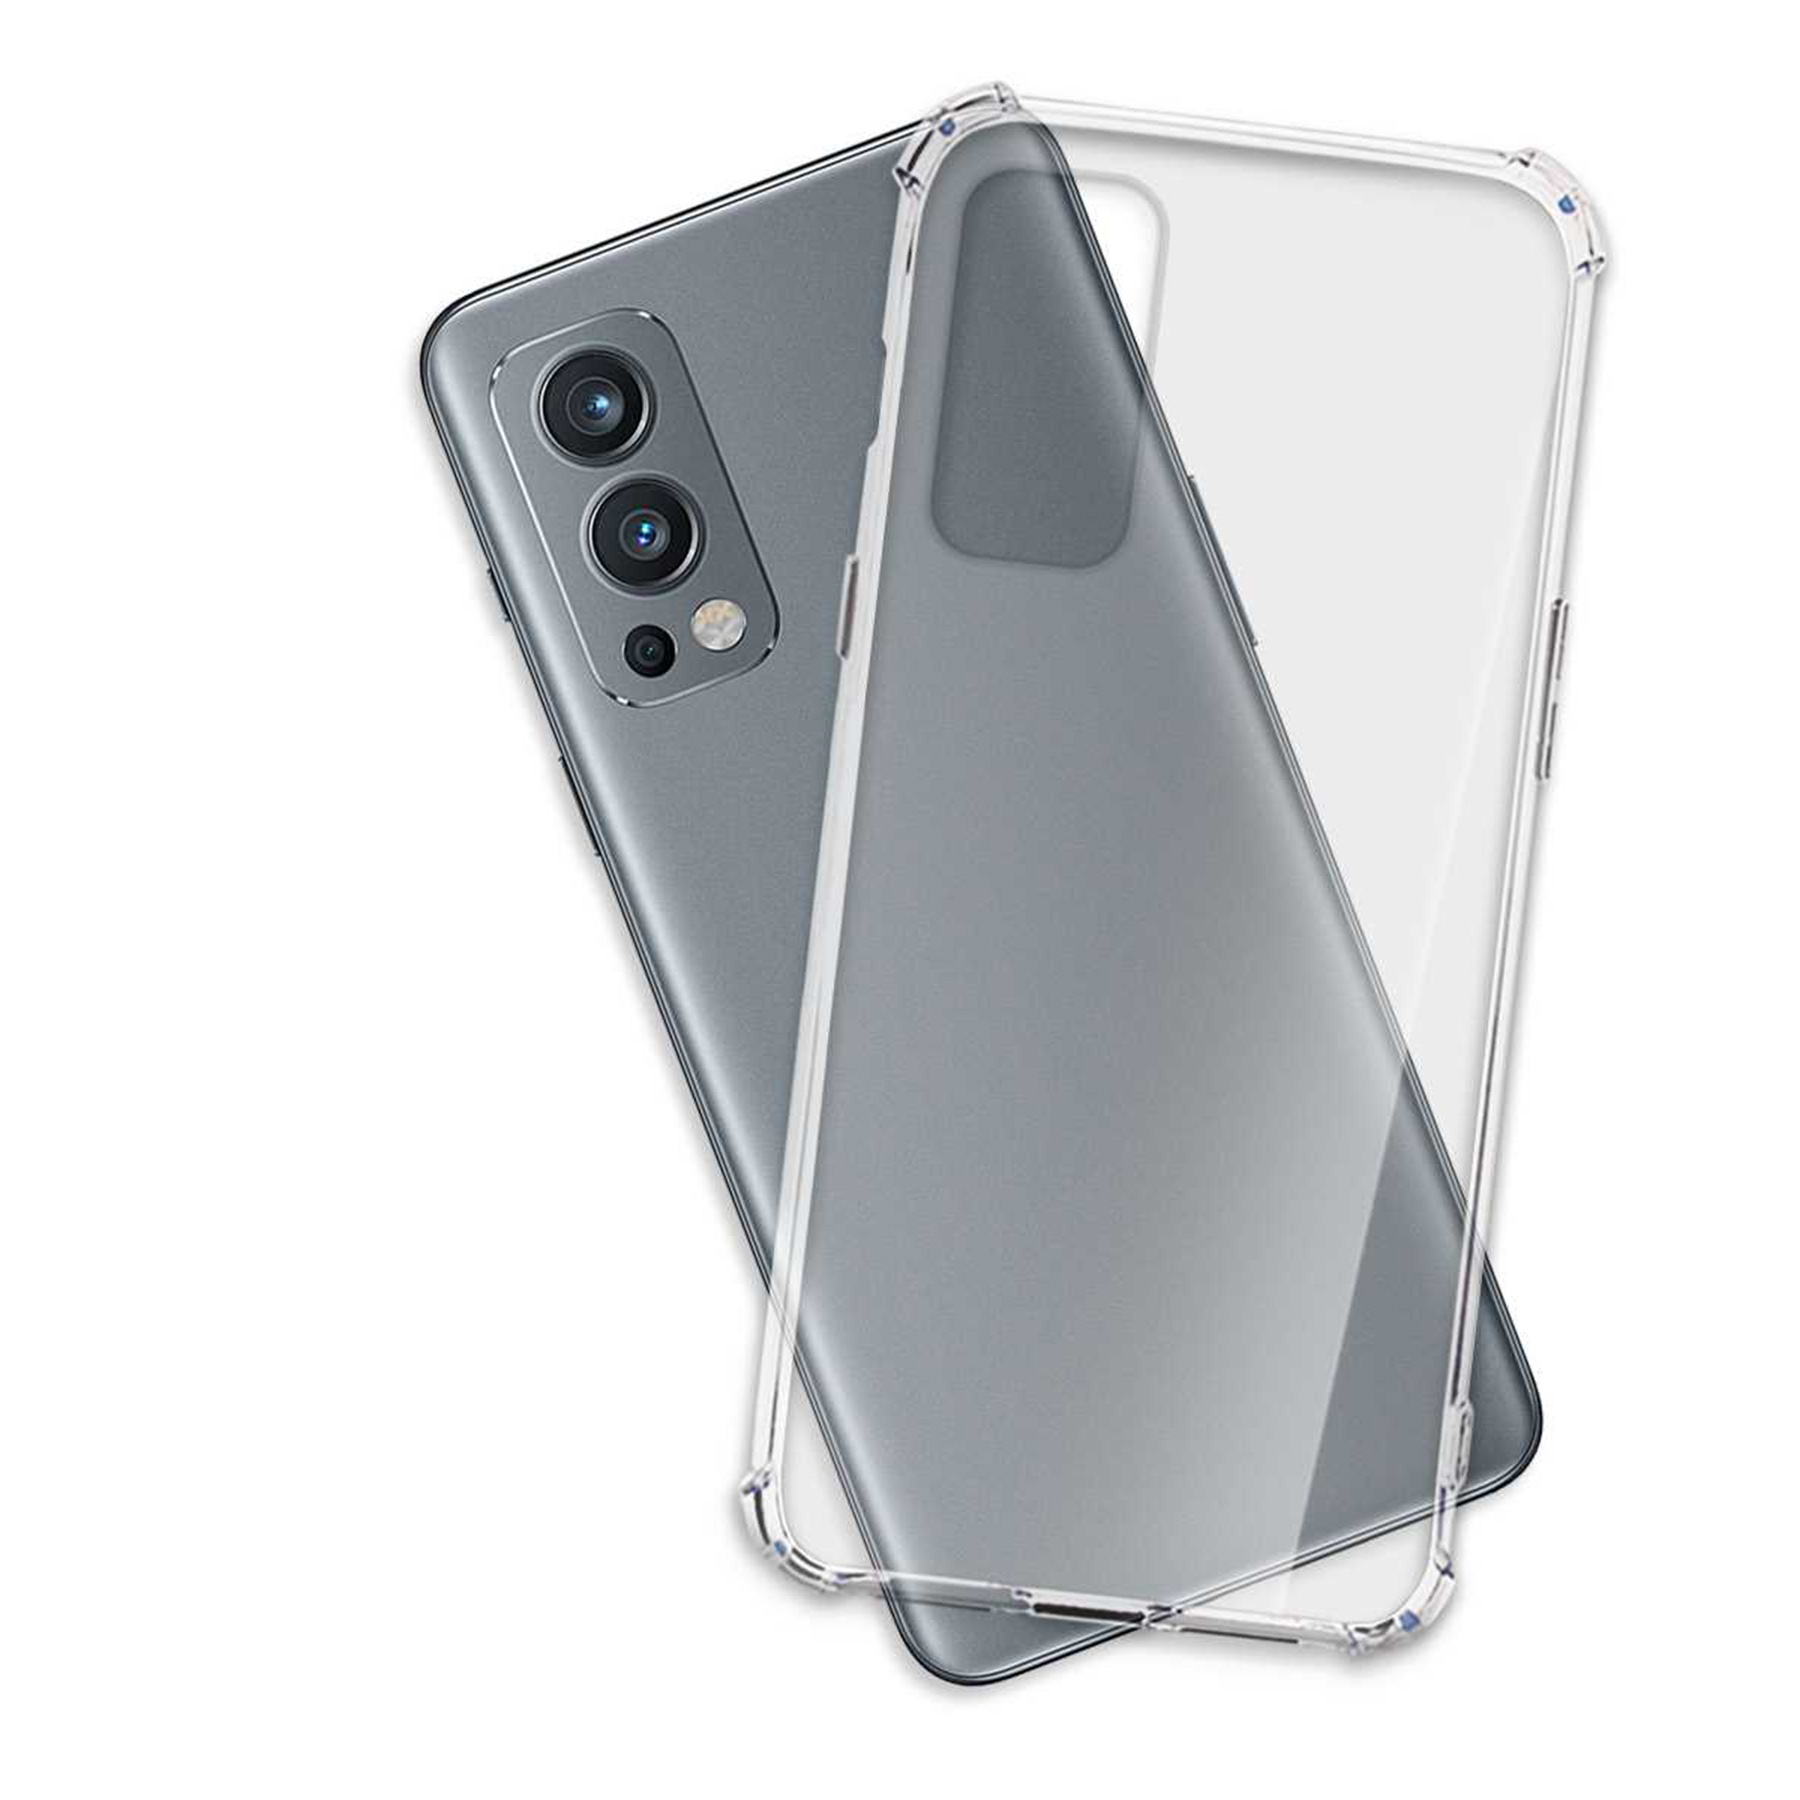 MTB MORE ENERGY 2 Nord Armor Transparent Backcover, OnePlus, Case, Clear 5G